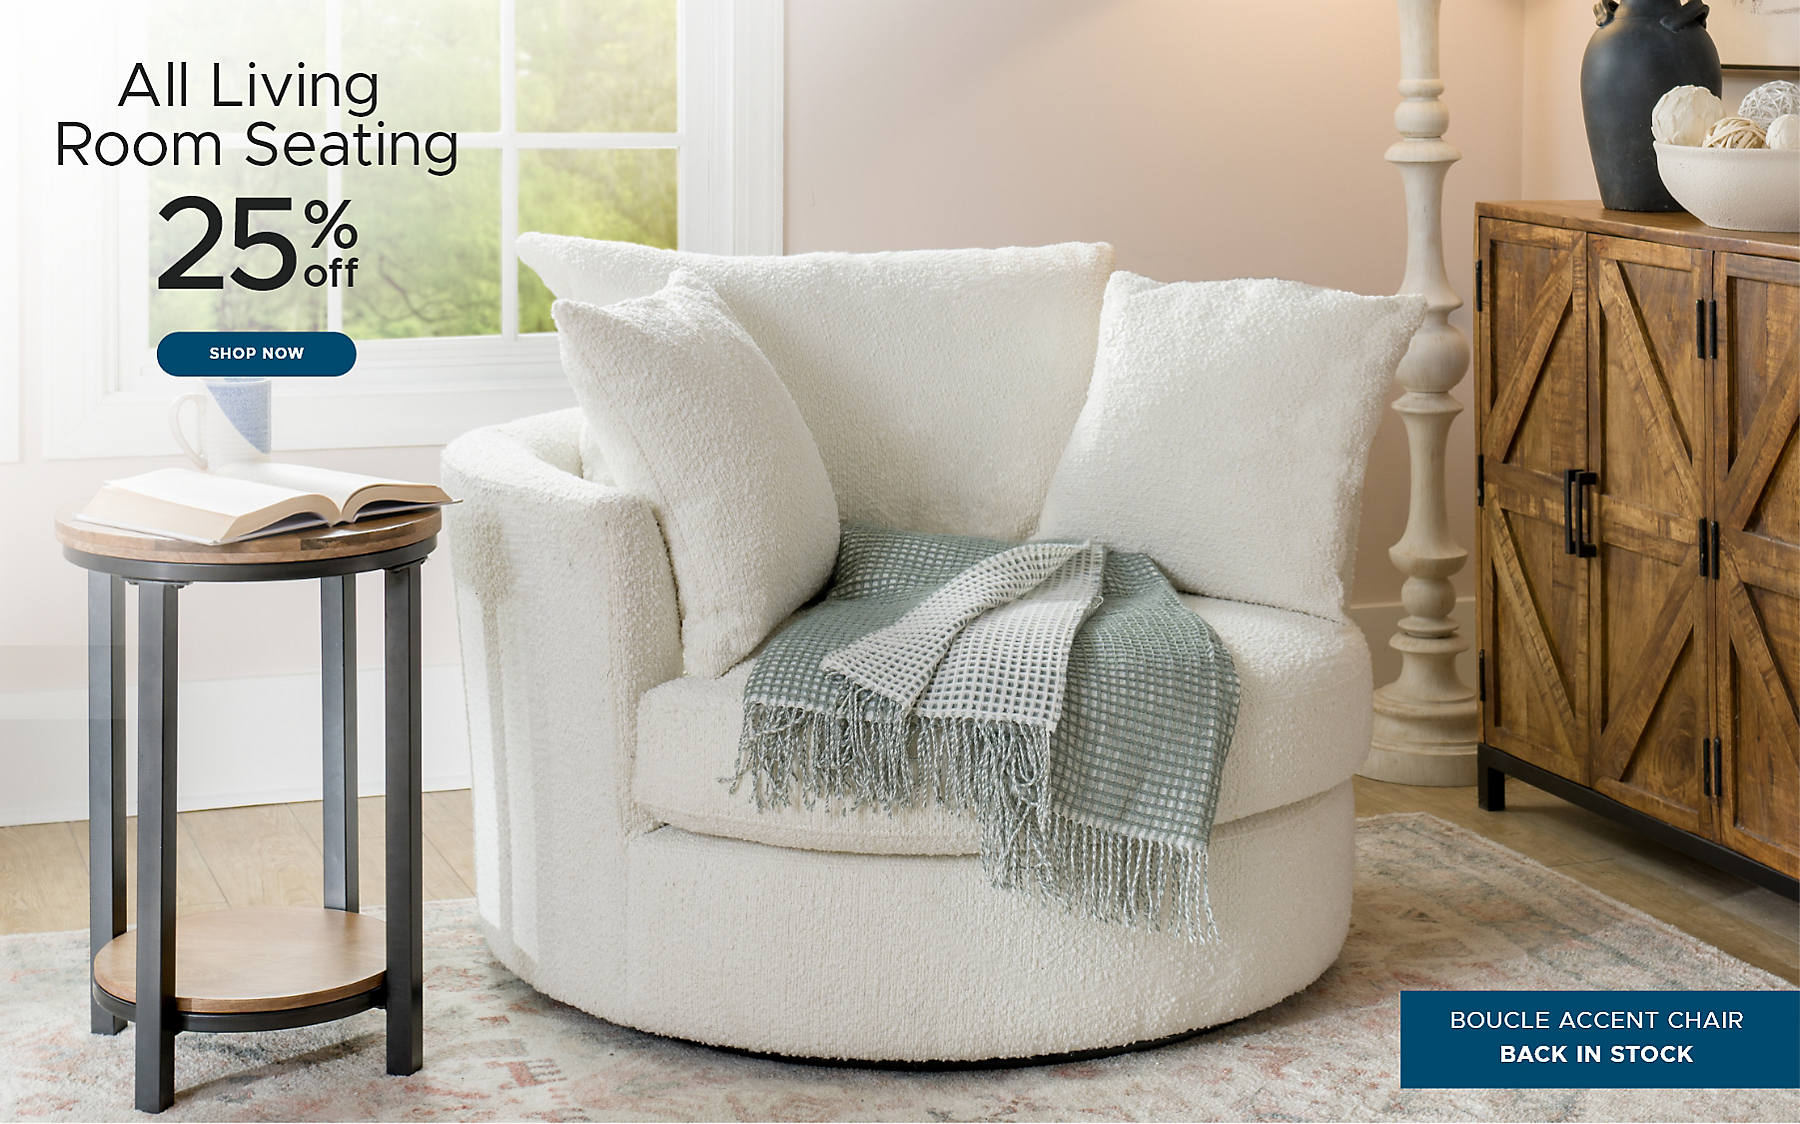 All Living Room Seating 25% off shop now boucle accent chair back in stock